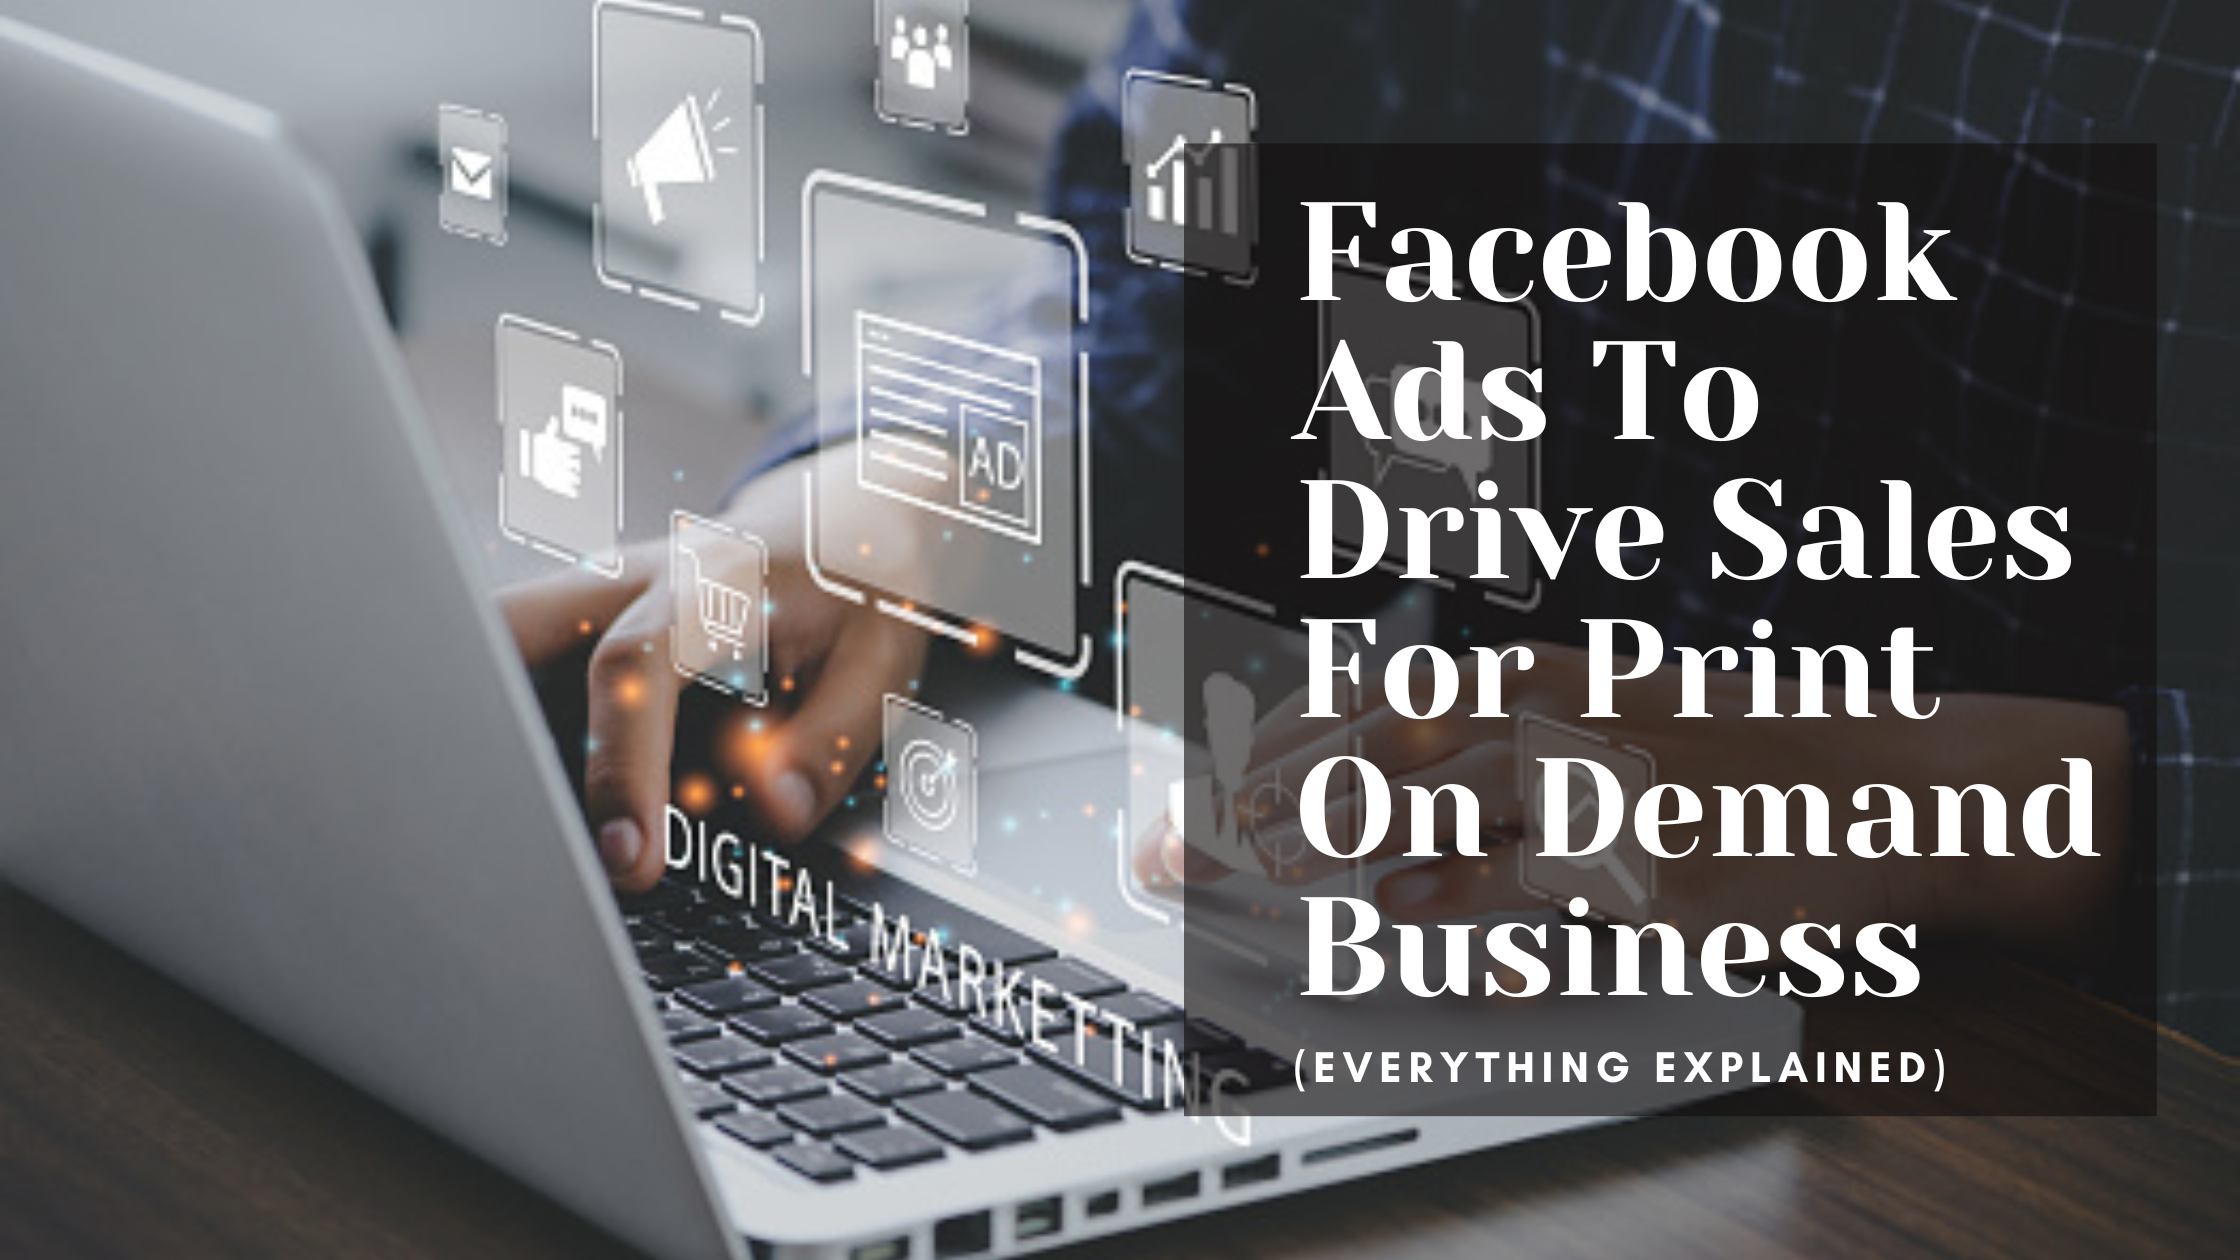 How To Use Facebook Ads To Drive Sales For Your Print On Demand Business